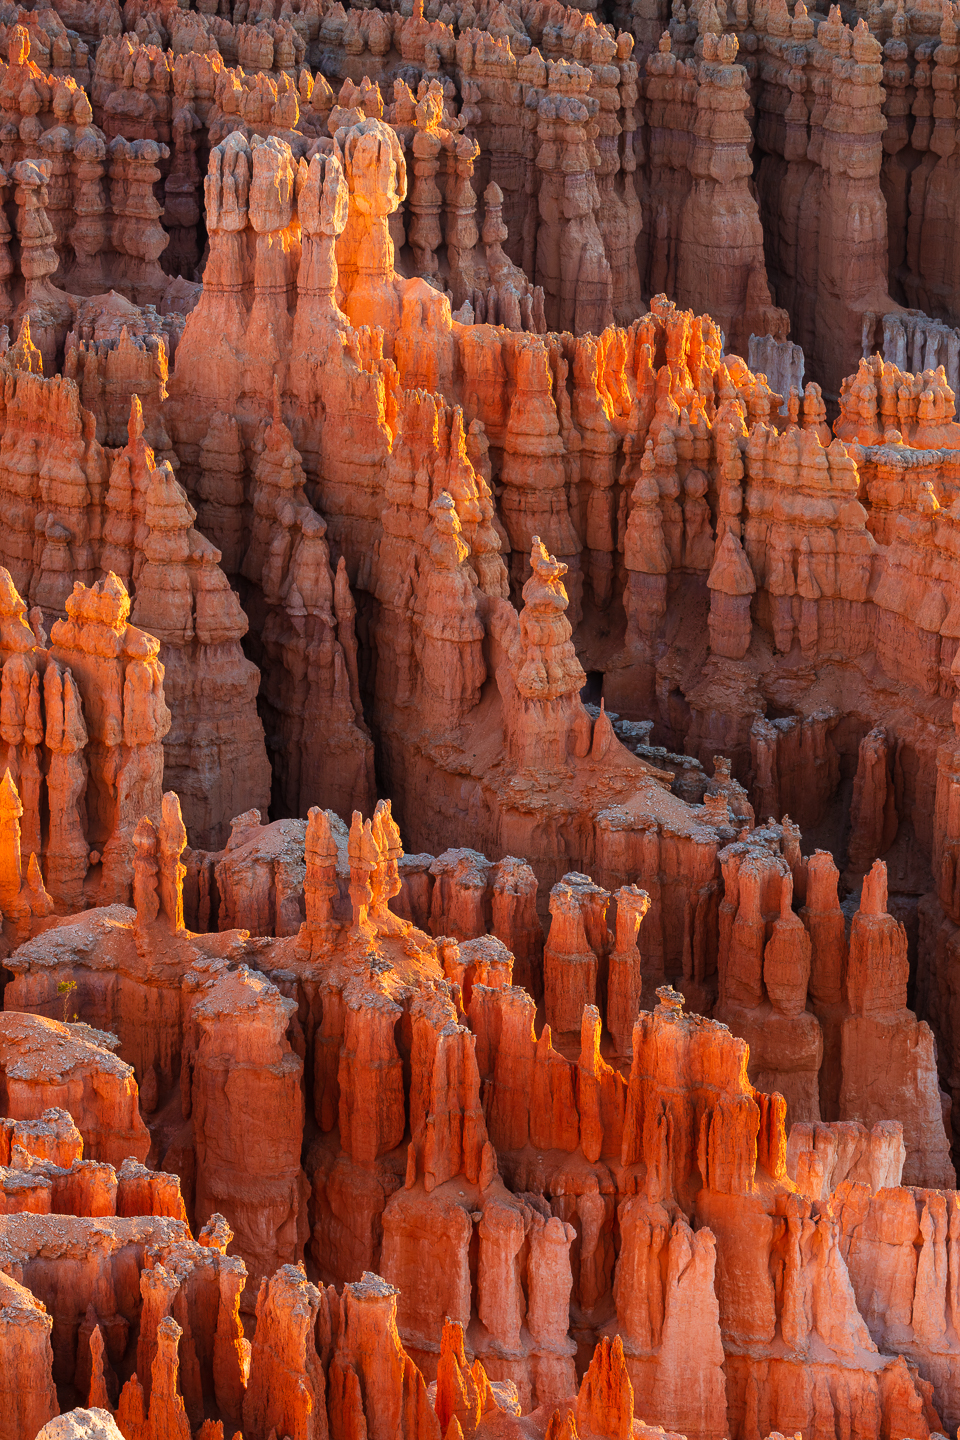 2nd PrizeOpen Color In Class 2 By Bill Crnkovich For Morning Light In Bryce Canyon DEC-2021.jpg